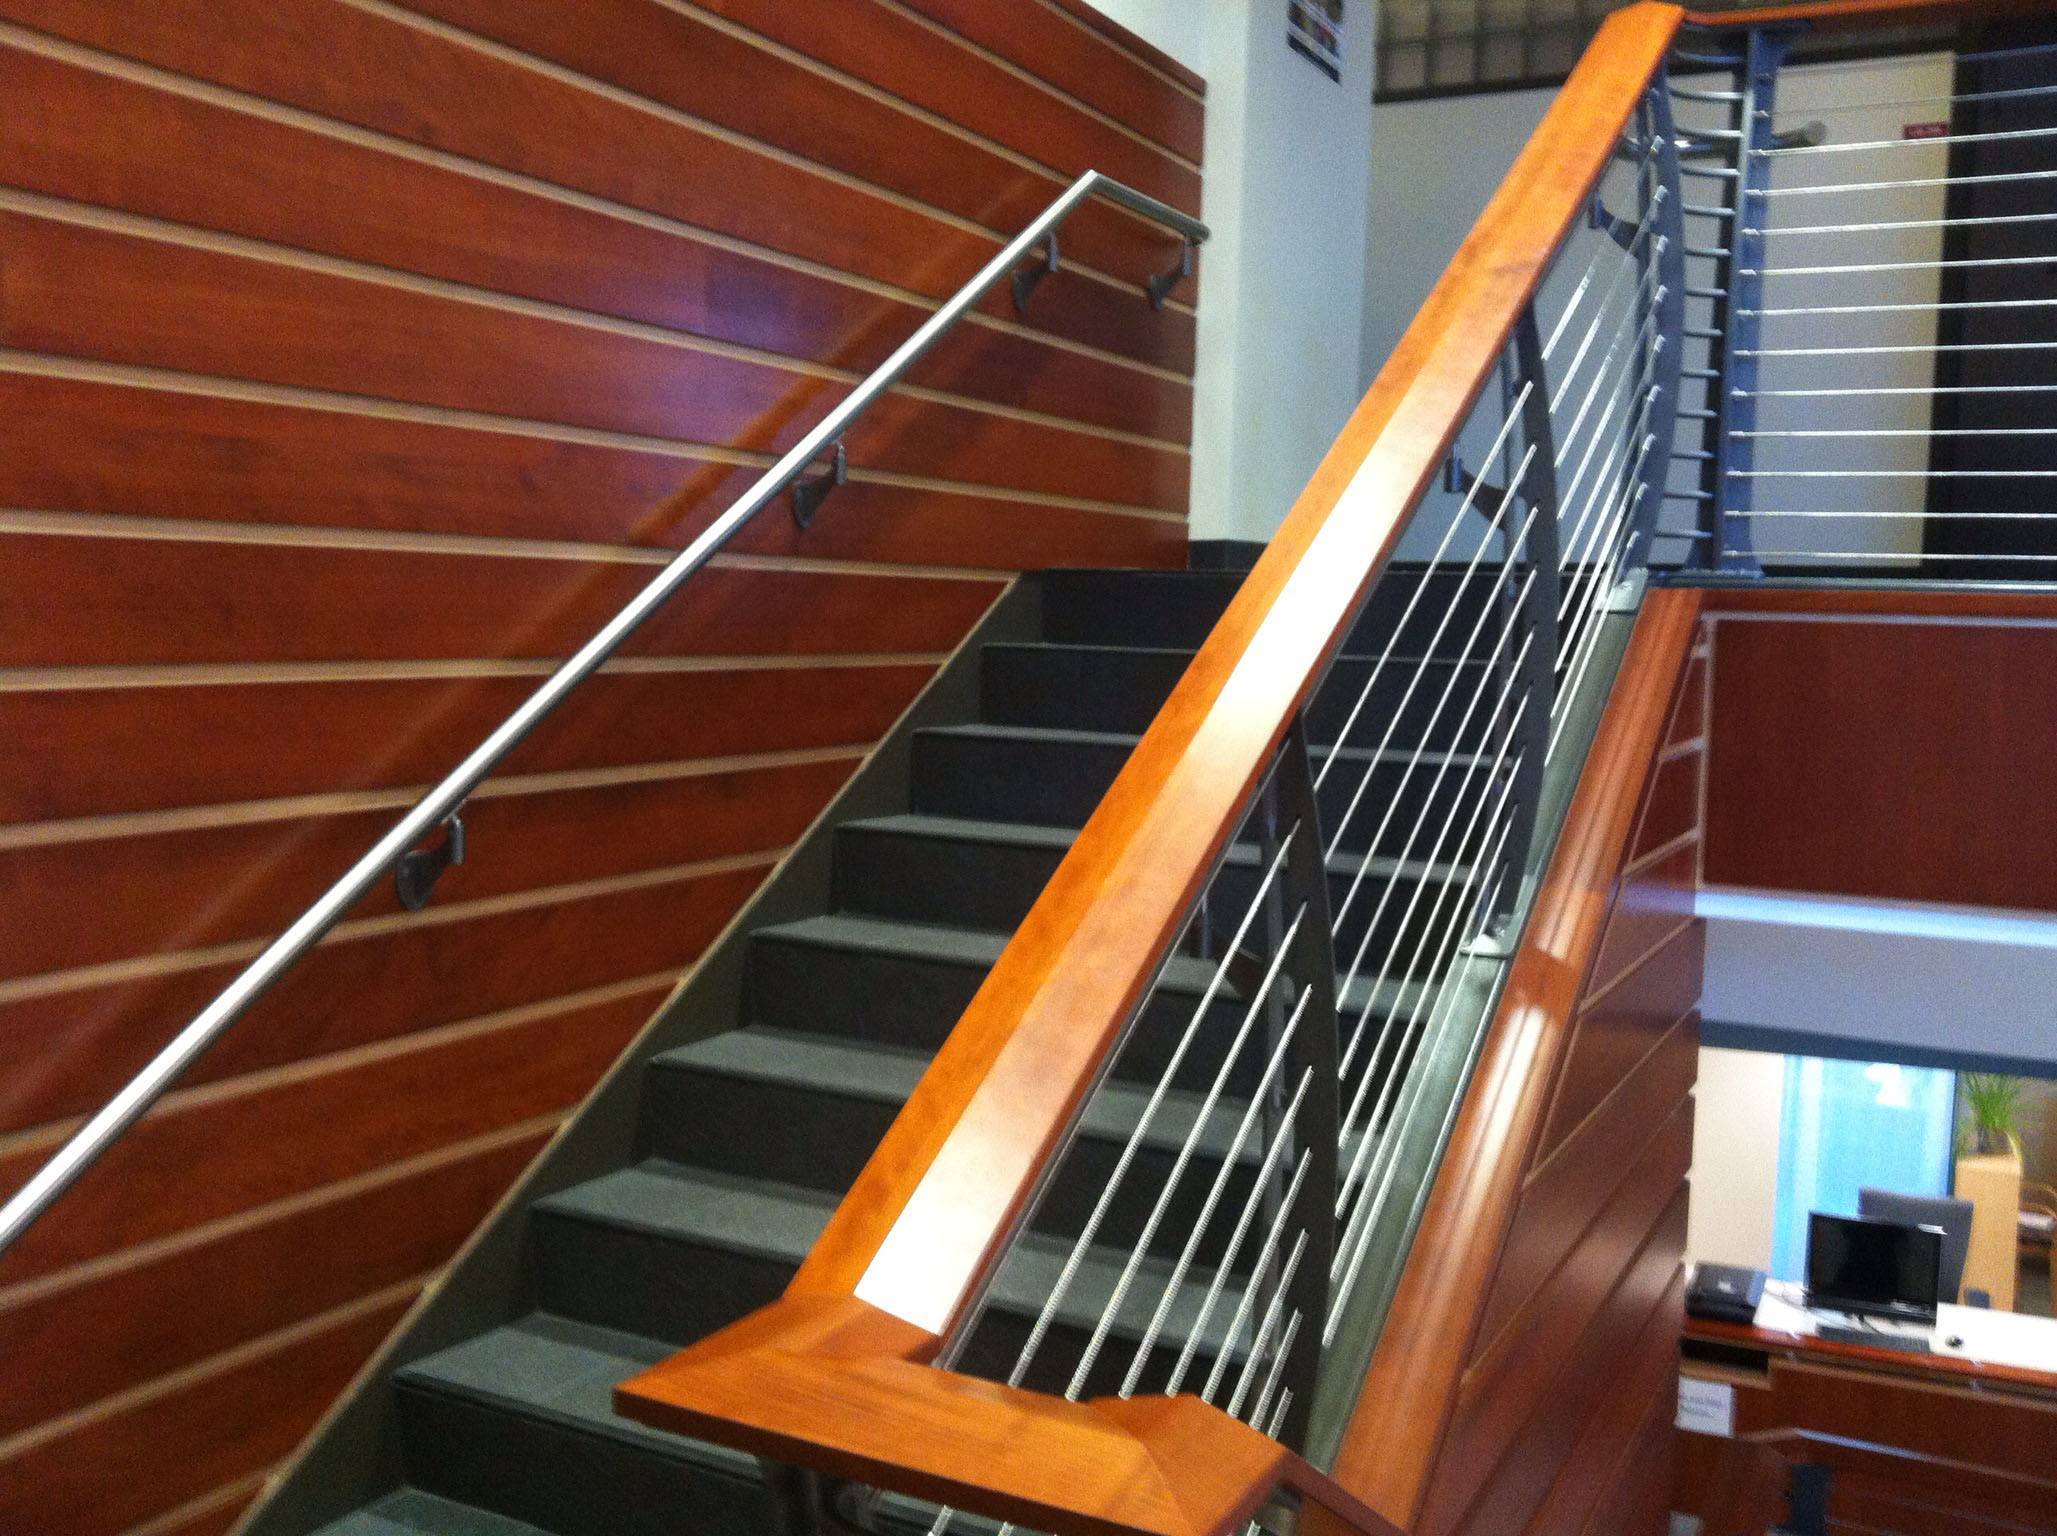 Teak and holly looking wall paneling accent this  staircase with a cherry banister